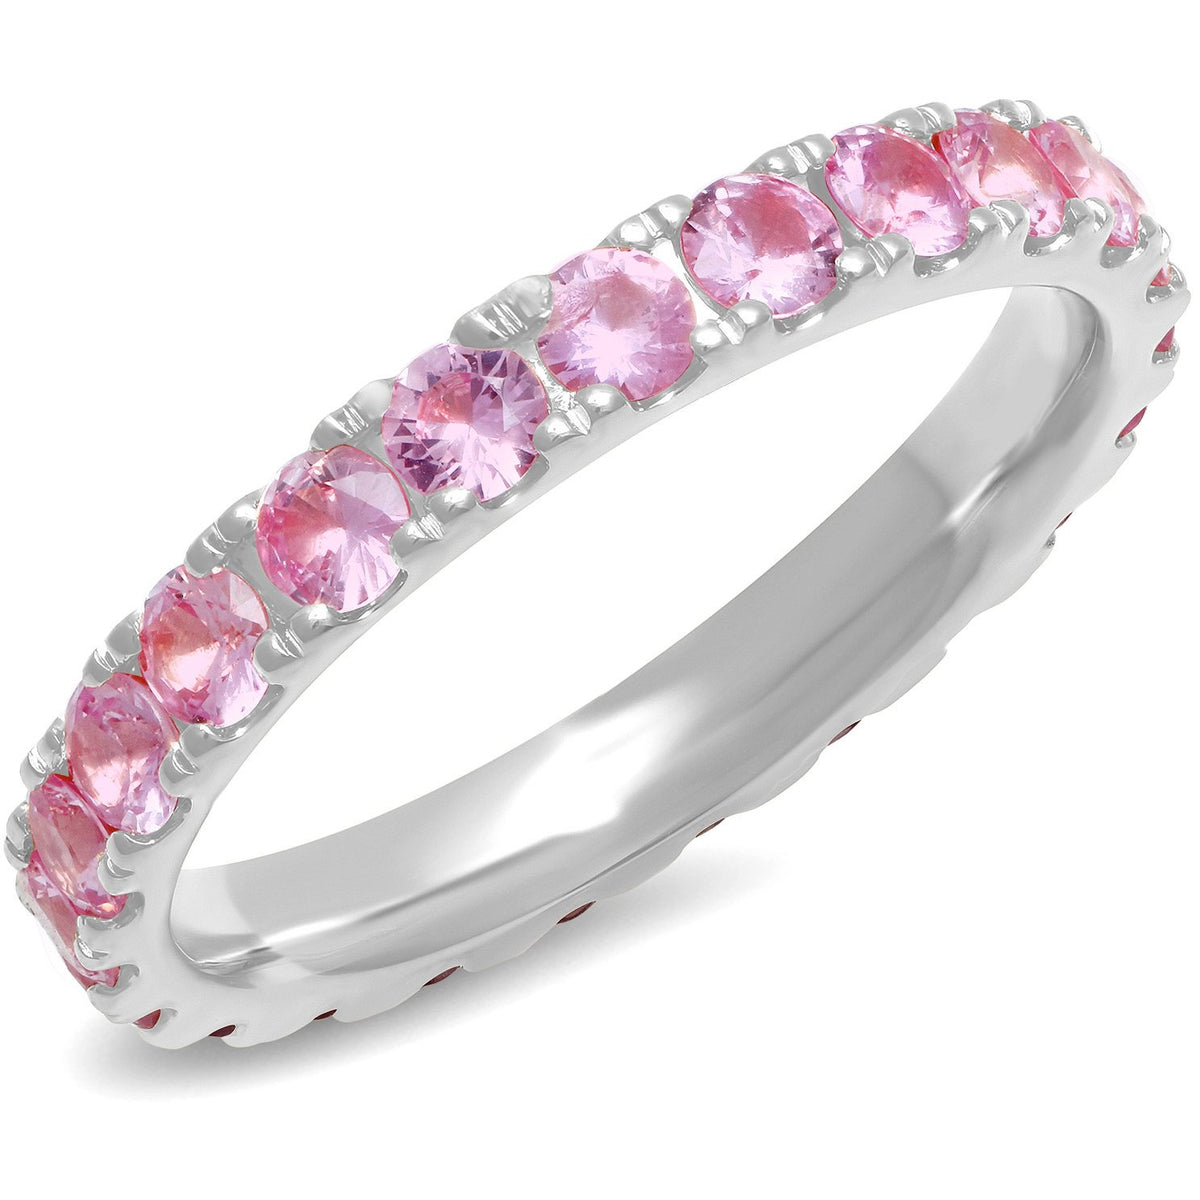 Large Pink Sapphire Eternity Band